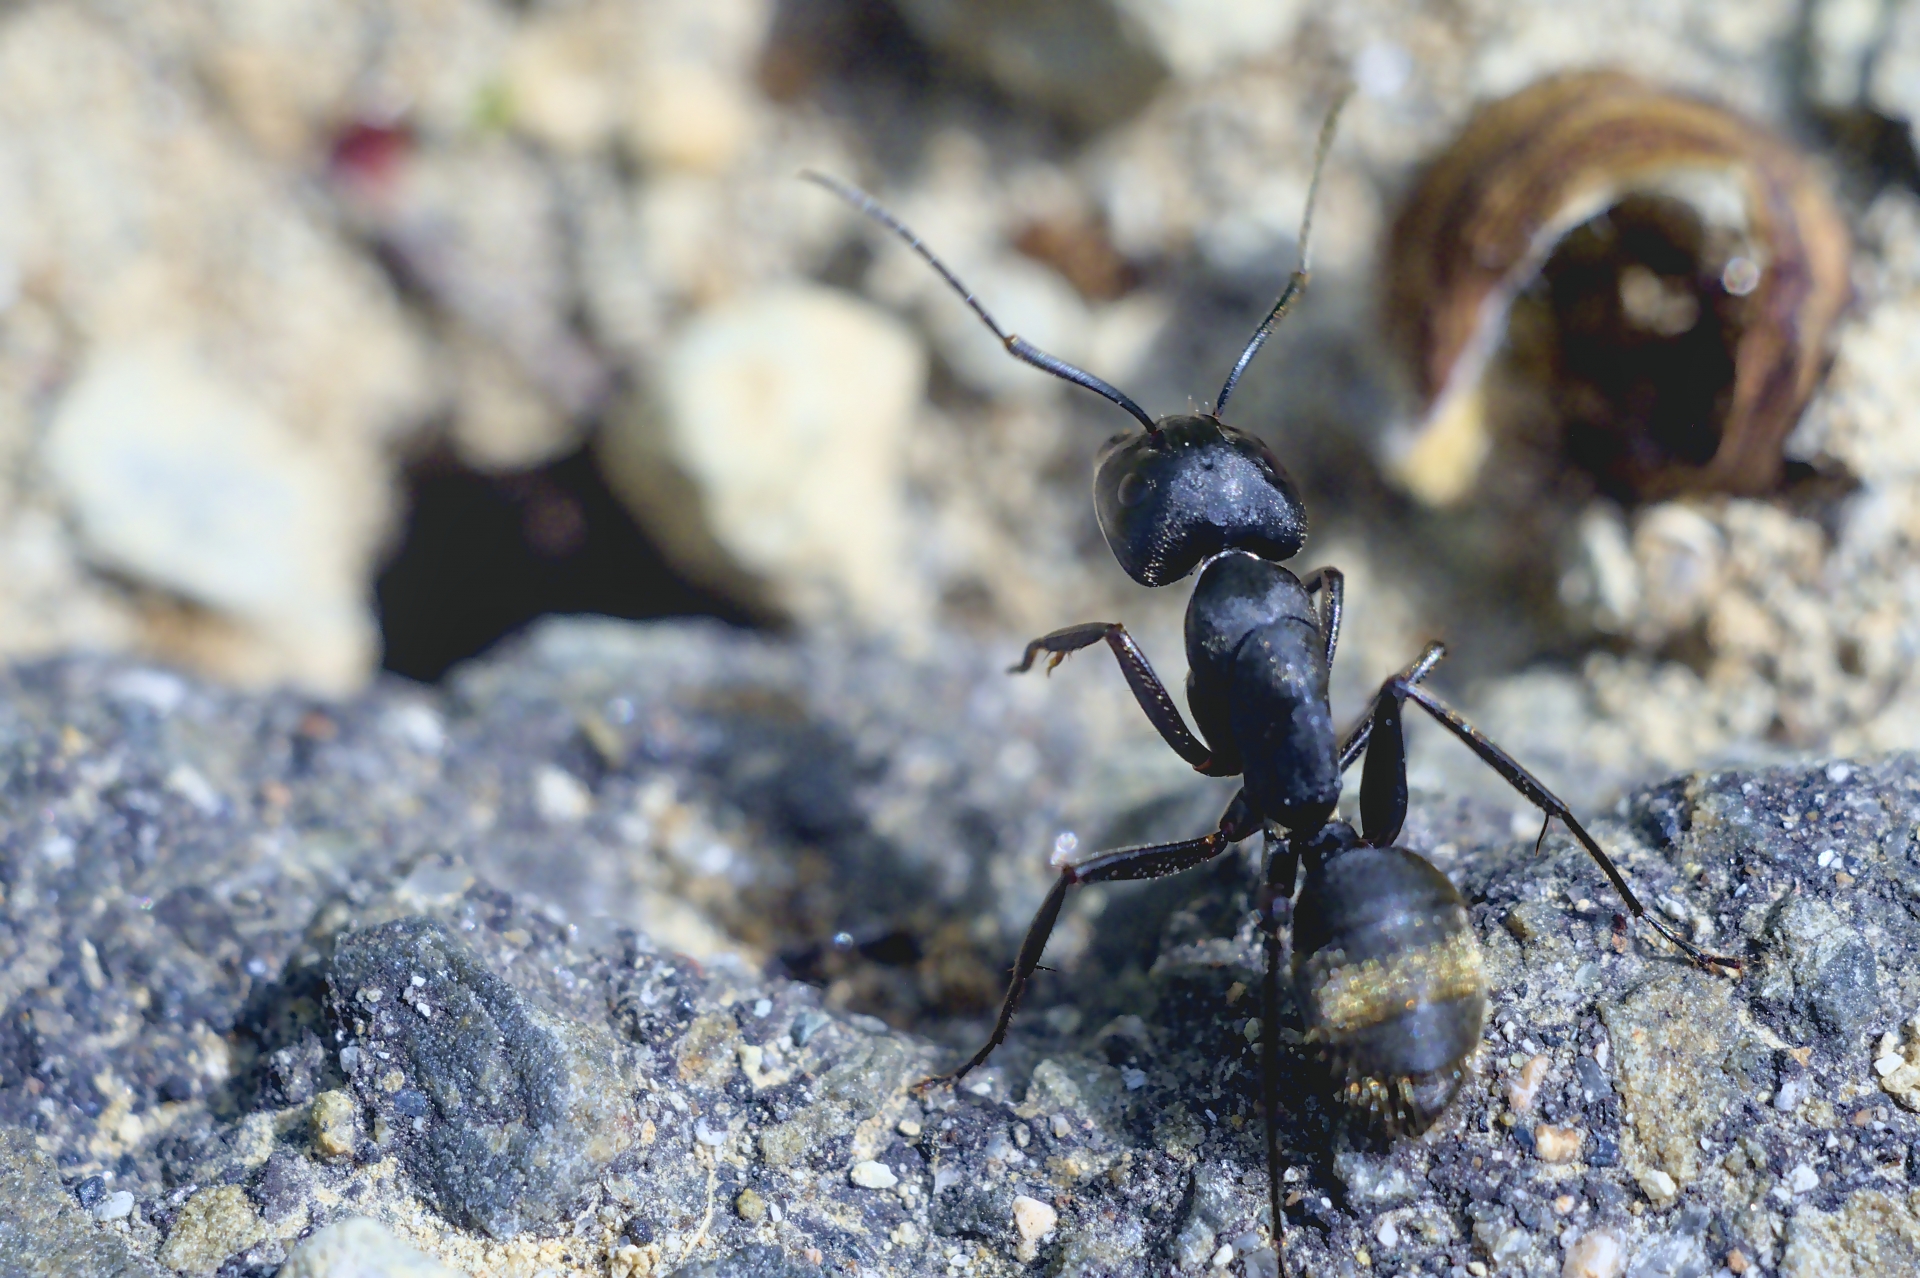 A black ant is raising its front legs on a rock.